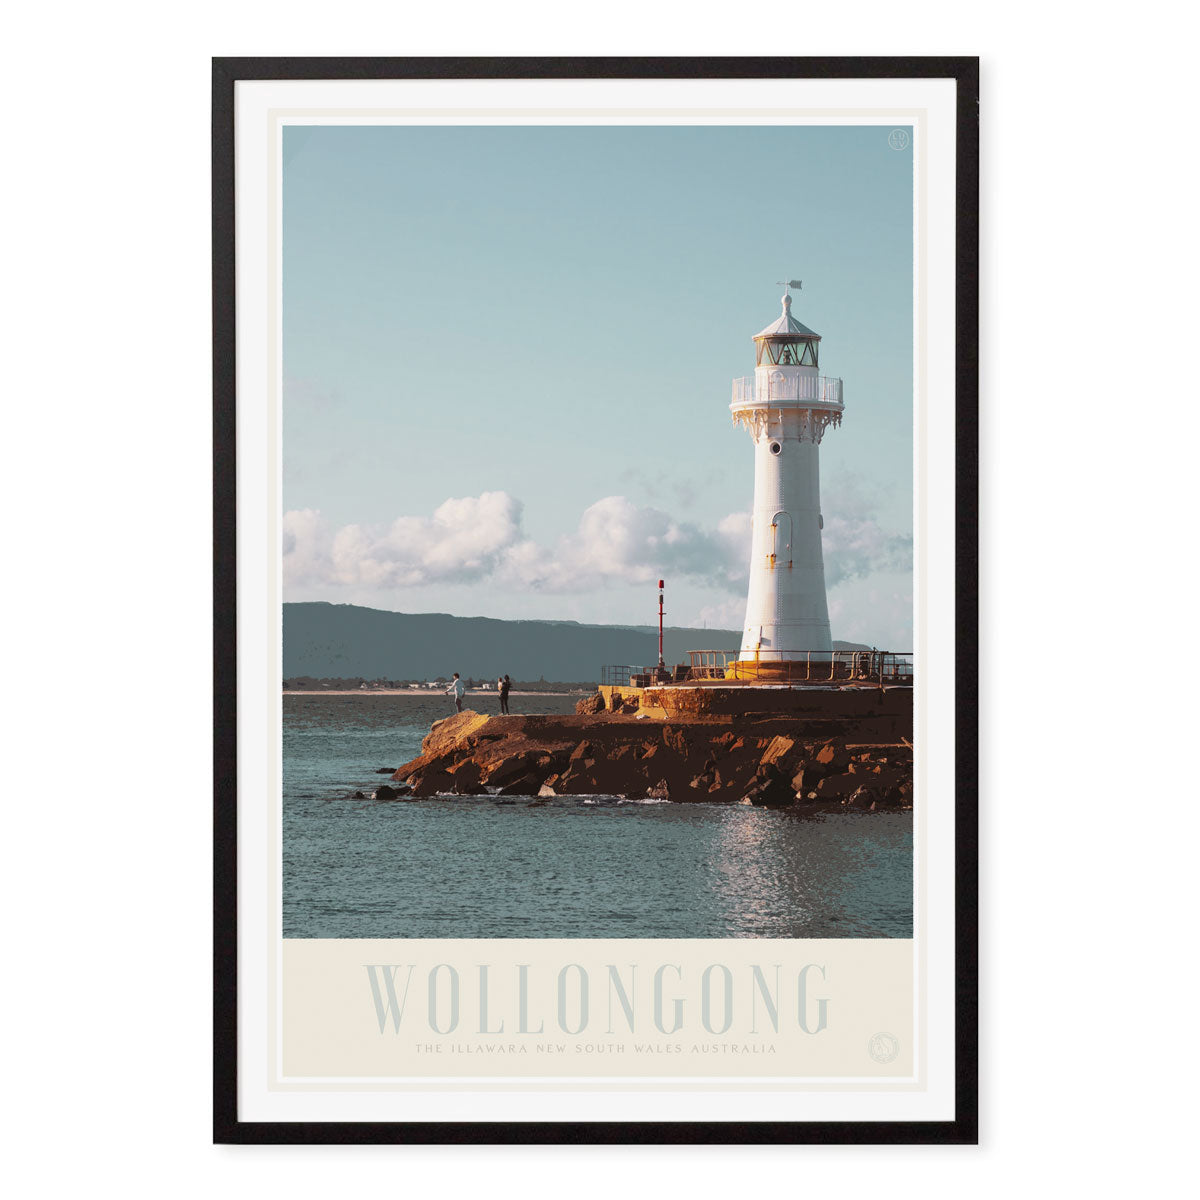 Wollongong NSW vintage retro travel poster print in black frame by Places We Luv